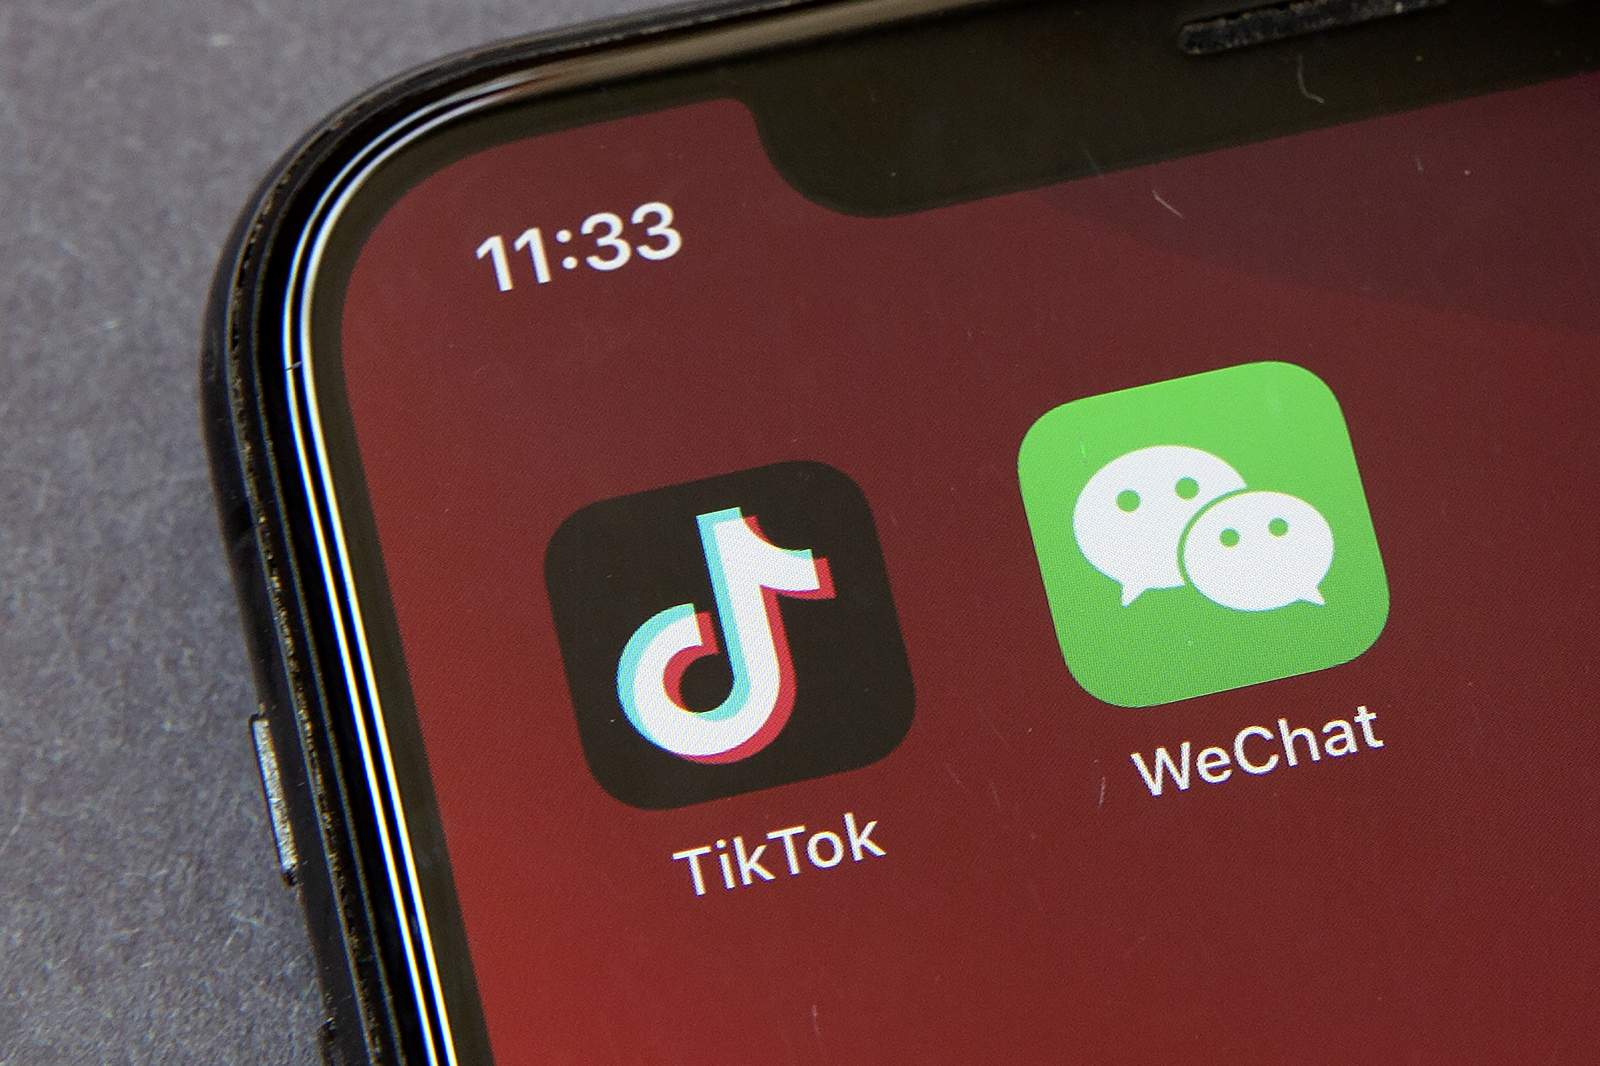 US judge approves injunction to delay WeChat restrictions